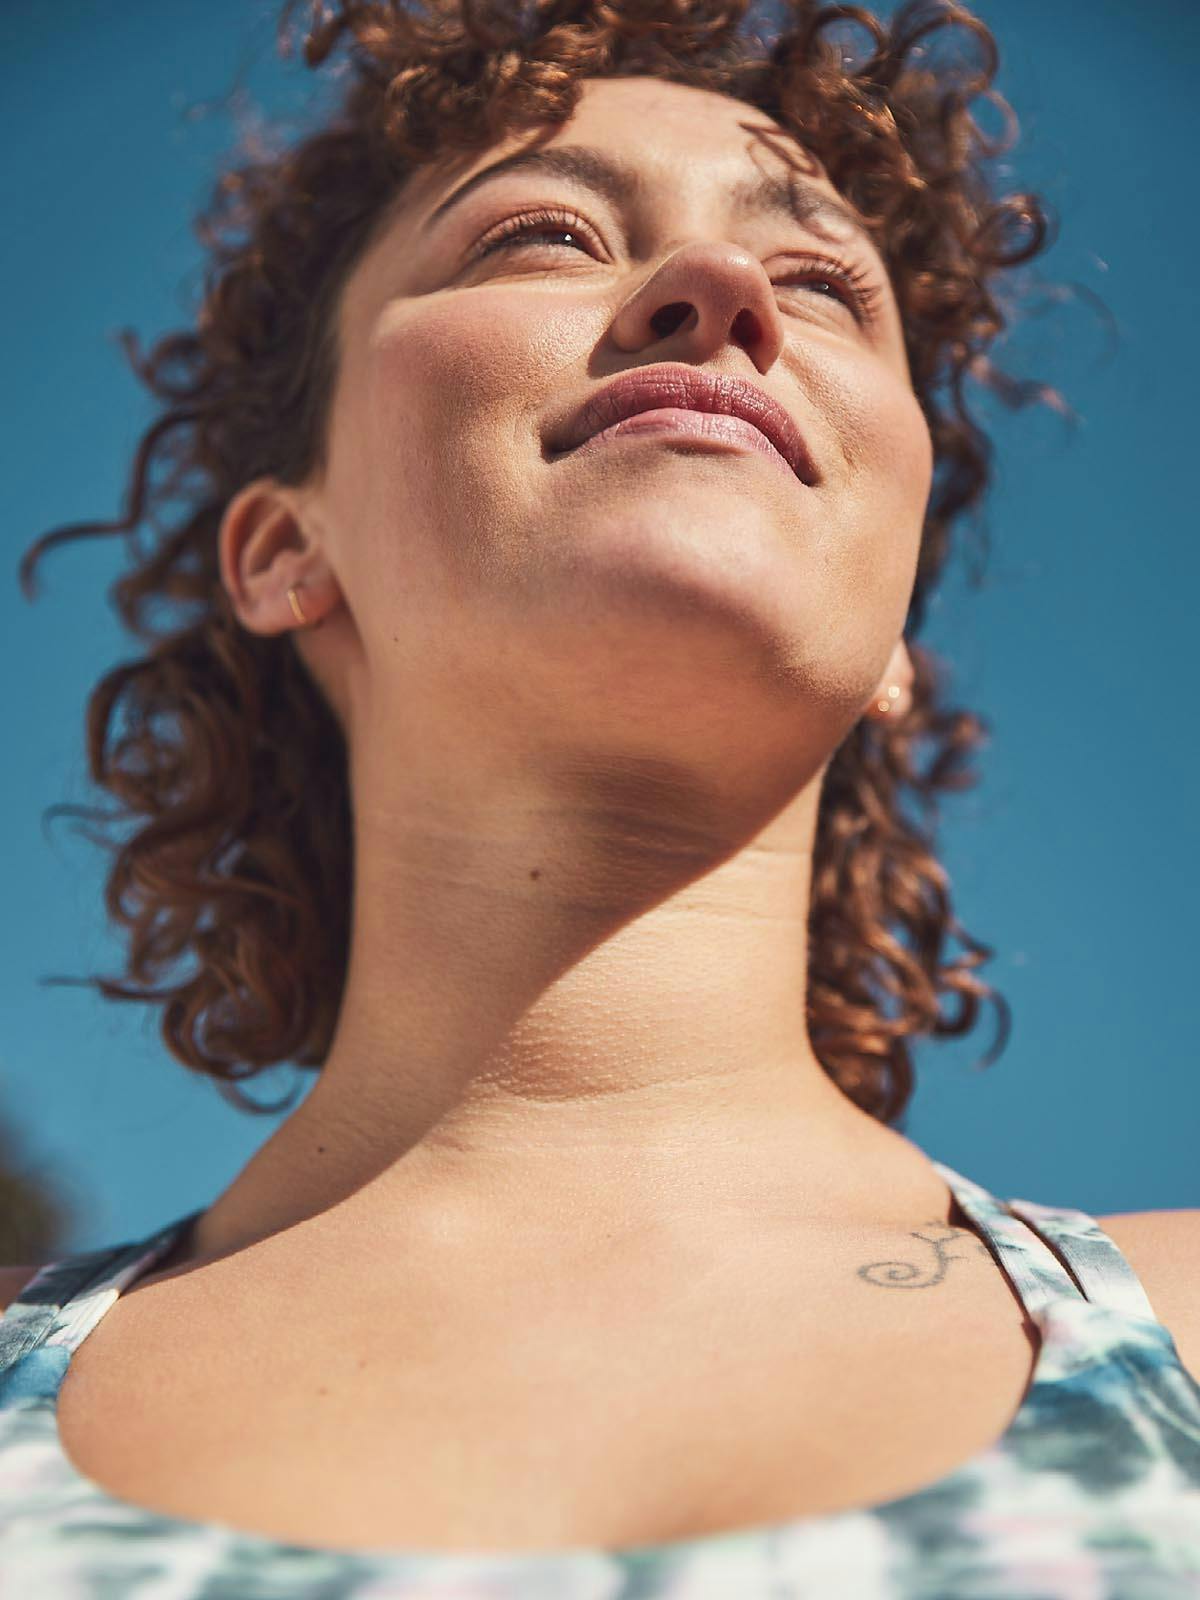 Curly-Haired Woman Smiling